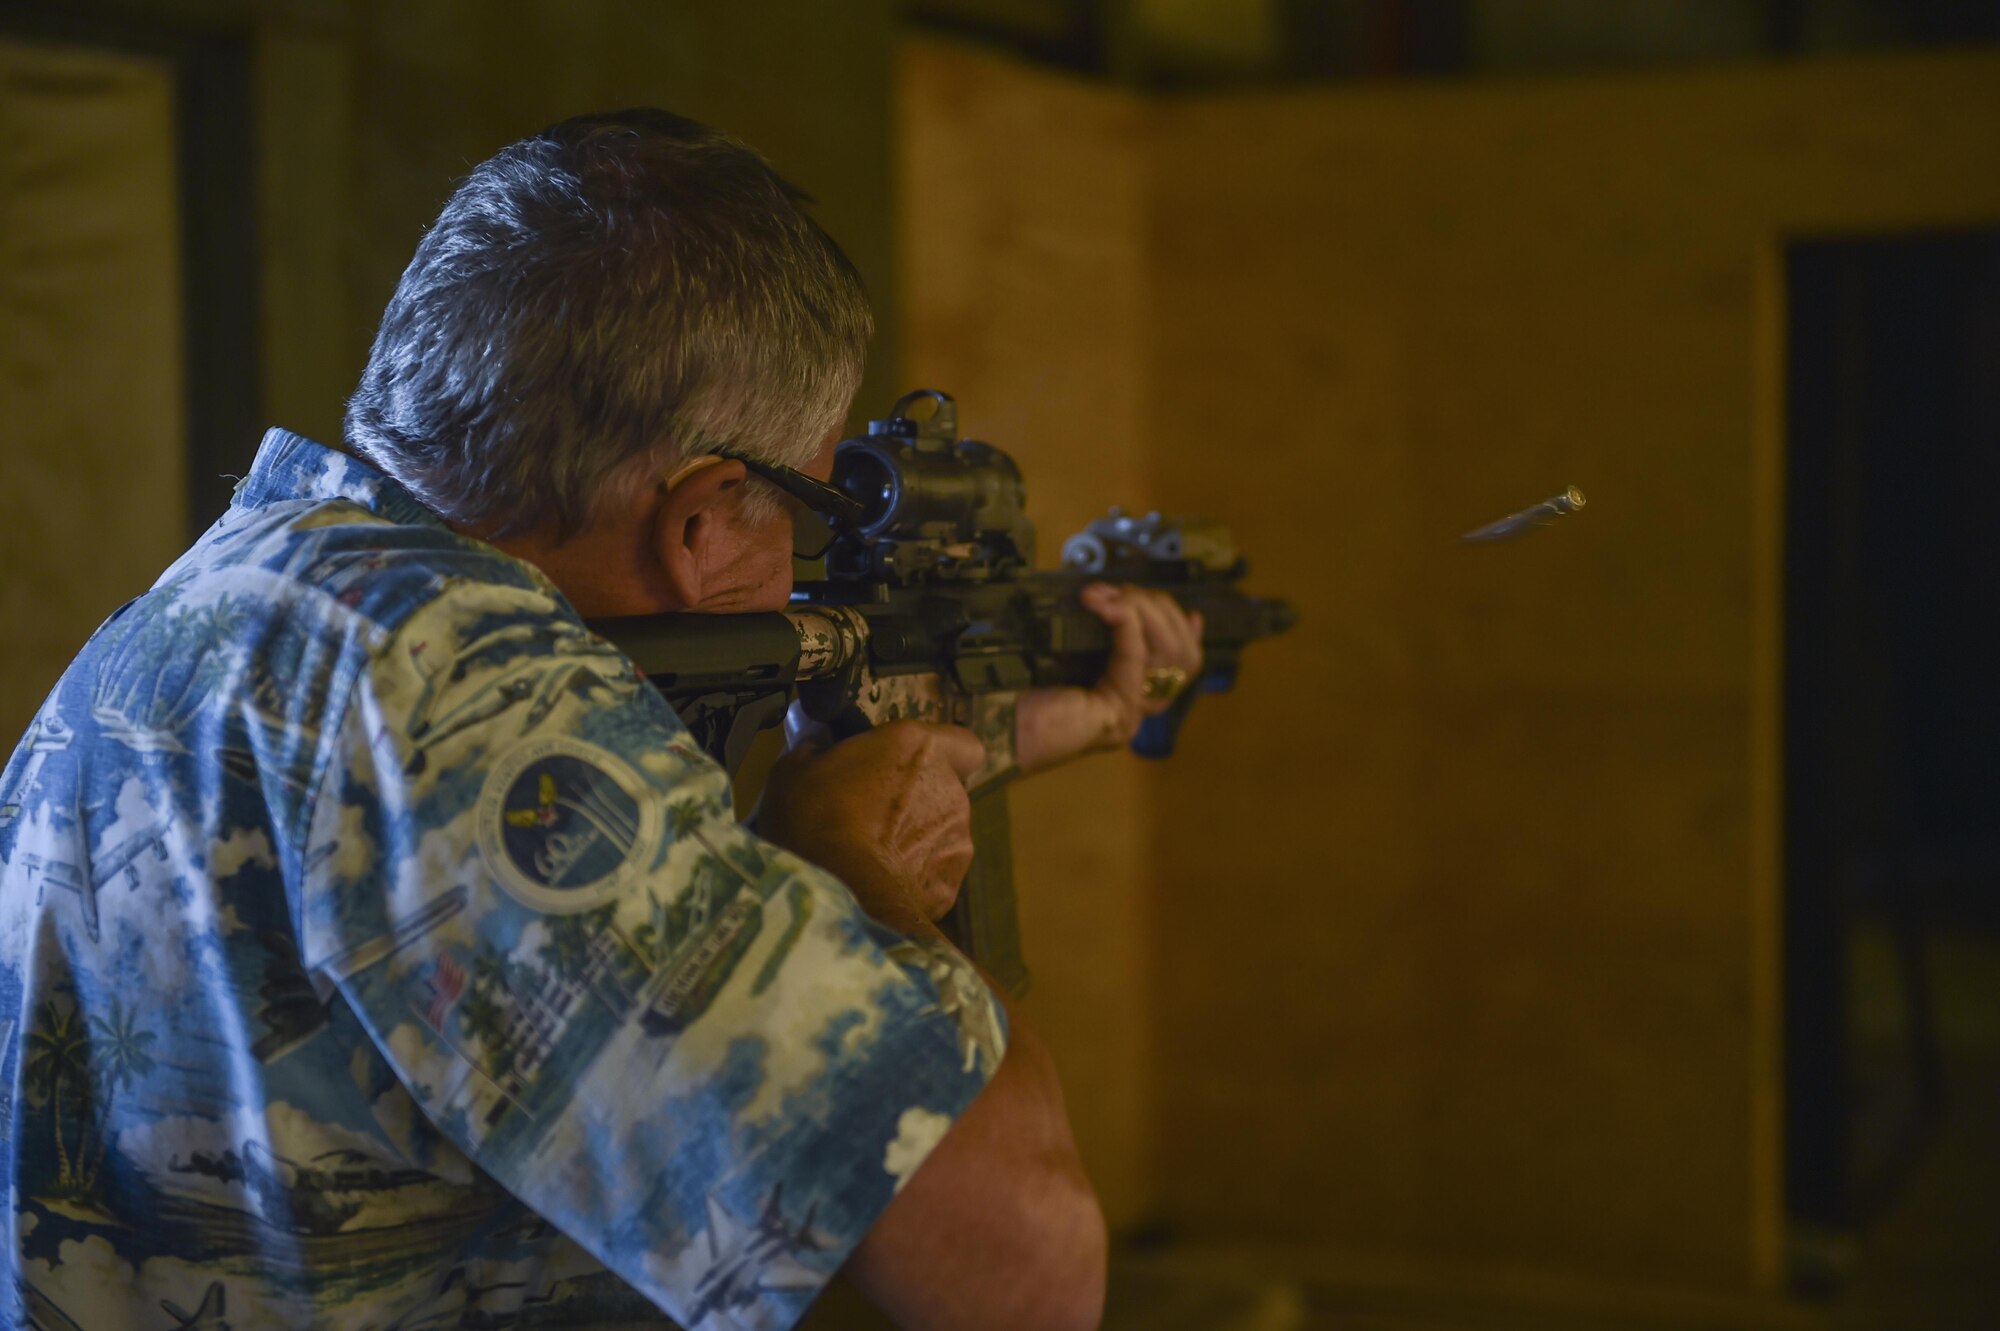 Mr. Lee Webber, a civic leader from Andersen Air Force Base, Guam, fires an M-4 Carbine during the Chief of Staff of the Air Force Civic Leader Tour at Hurlburt Field, Fla., Nov. 2, 2016. A group of CSAF civic leaders were given a hands-on tour of Special Tactics capabilities and offered a unique perspective of the Air Force’s ground operators through several operational demonstrations. (U.S. Air Force photo by Senior Airman Ryan Conroy)